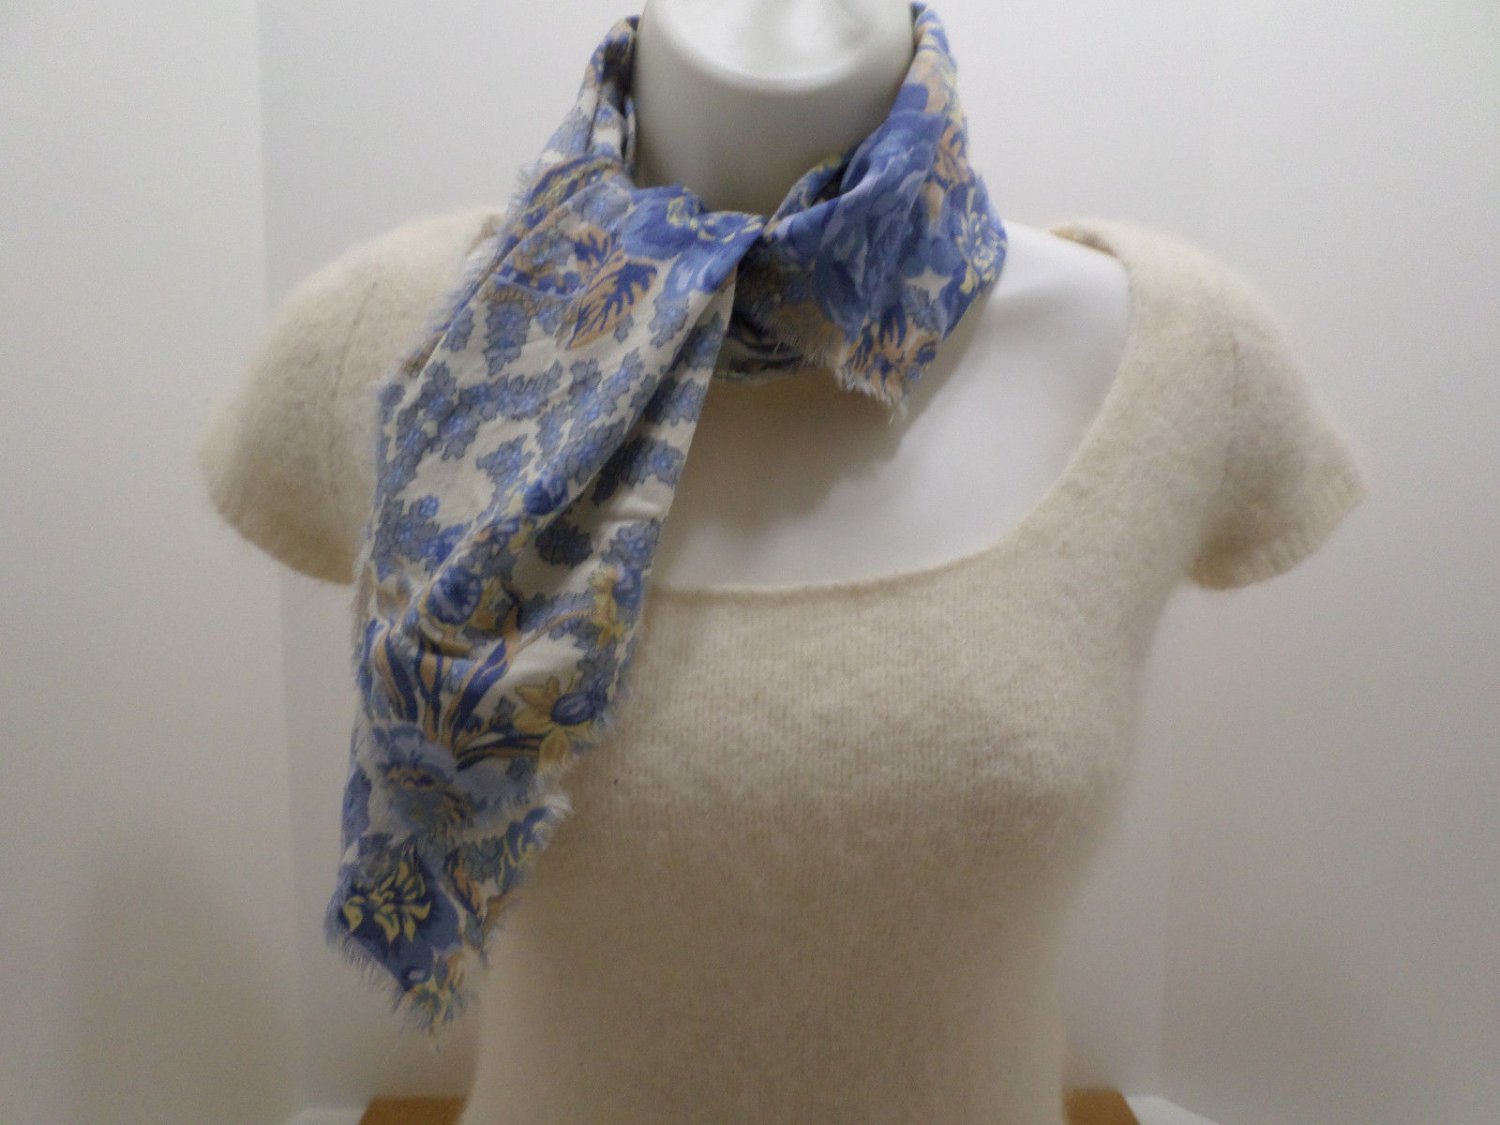 Vintage Scarf with Fringed Edges Off White with Blue Roses Tan Leaves Paisley